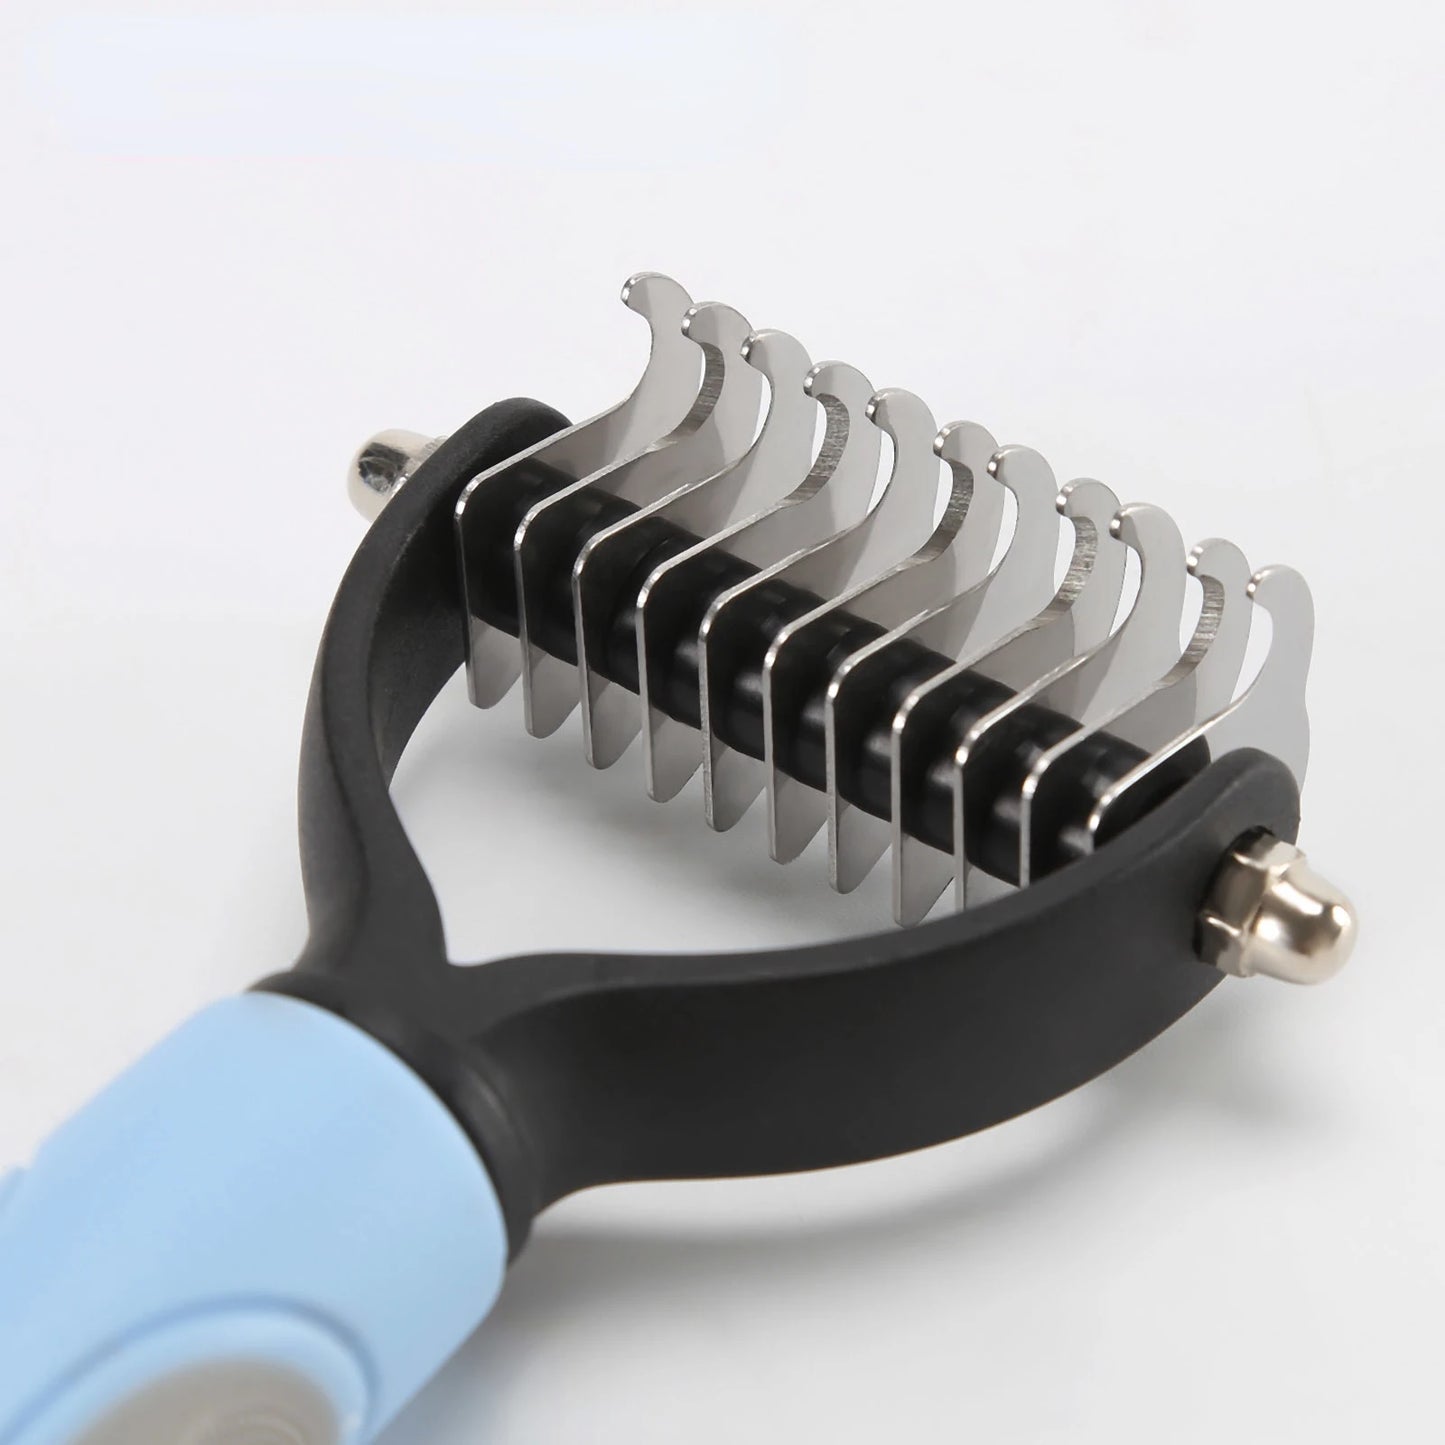 Pet Fur Knot Cutter Brush 2 Sided Comb Dog Cat Grooming Hair Remove Tools Puppy Hair Shedding Trimmer Clean Deshedding Brushes